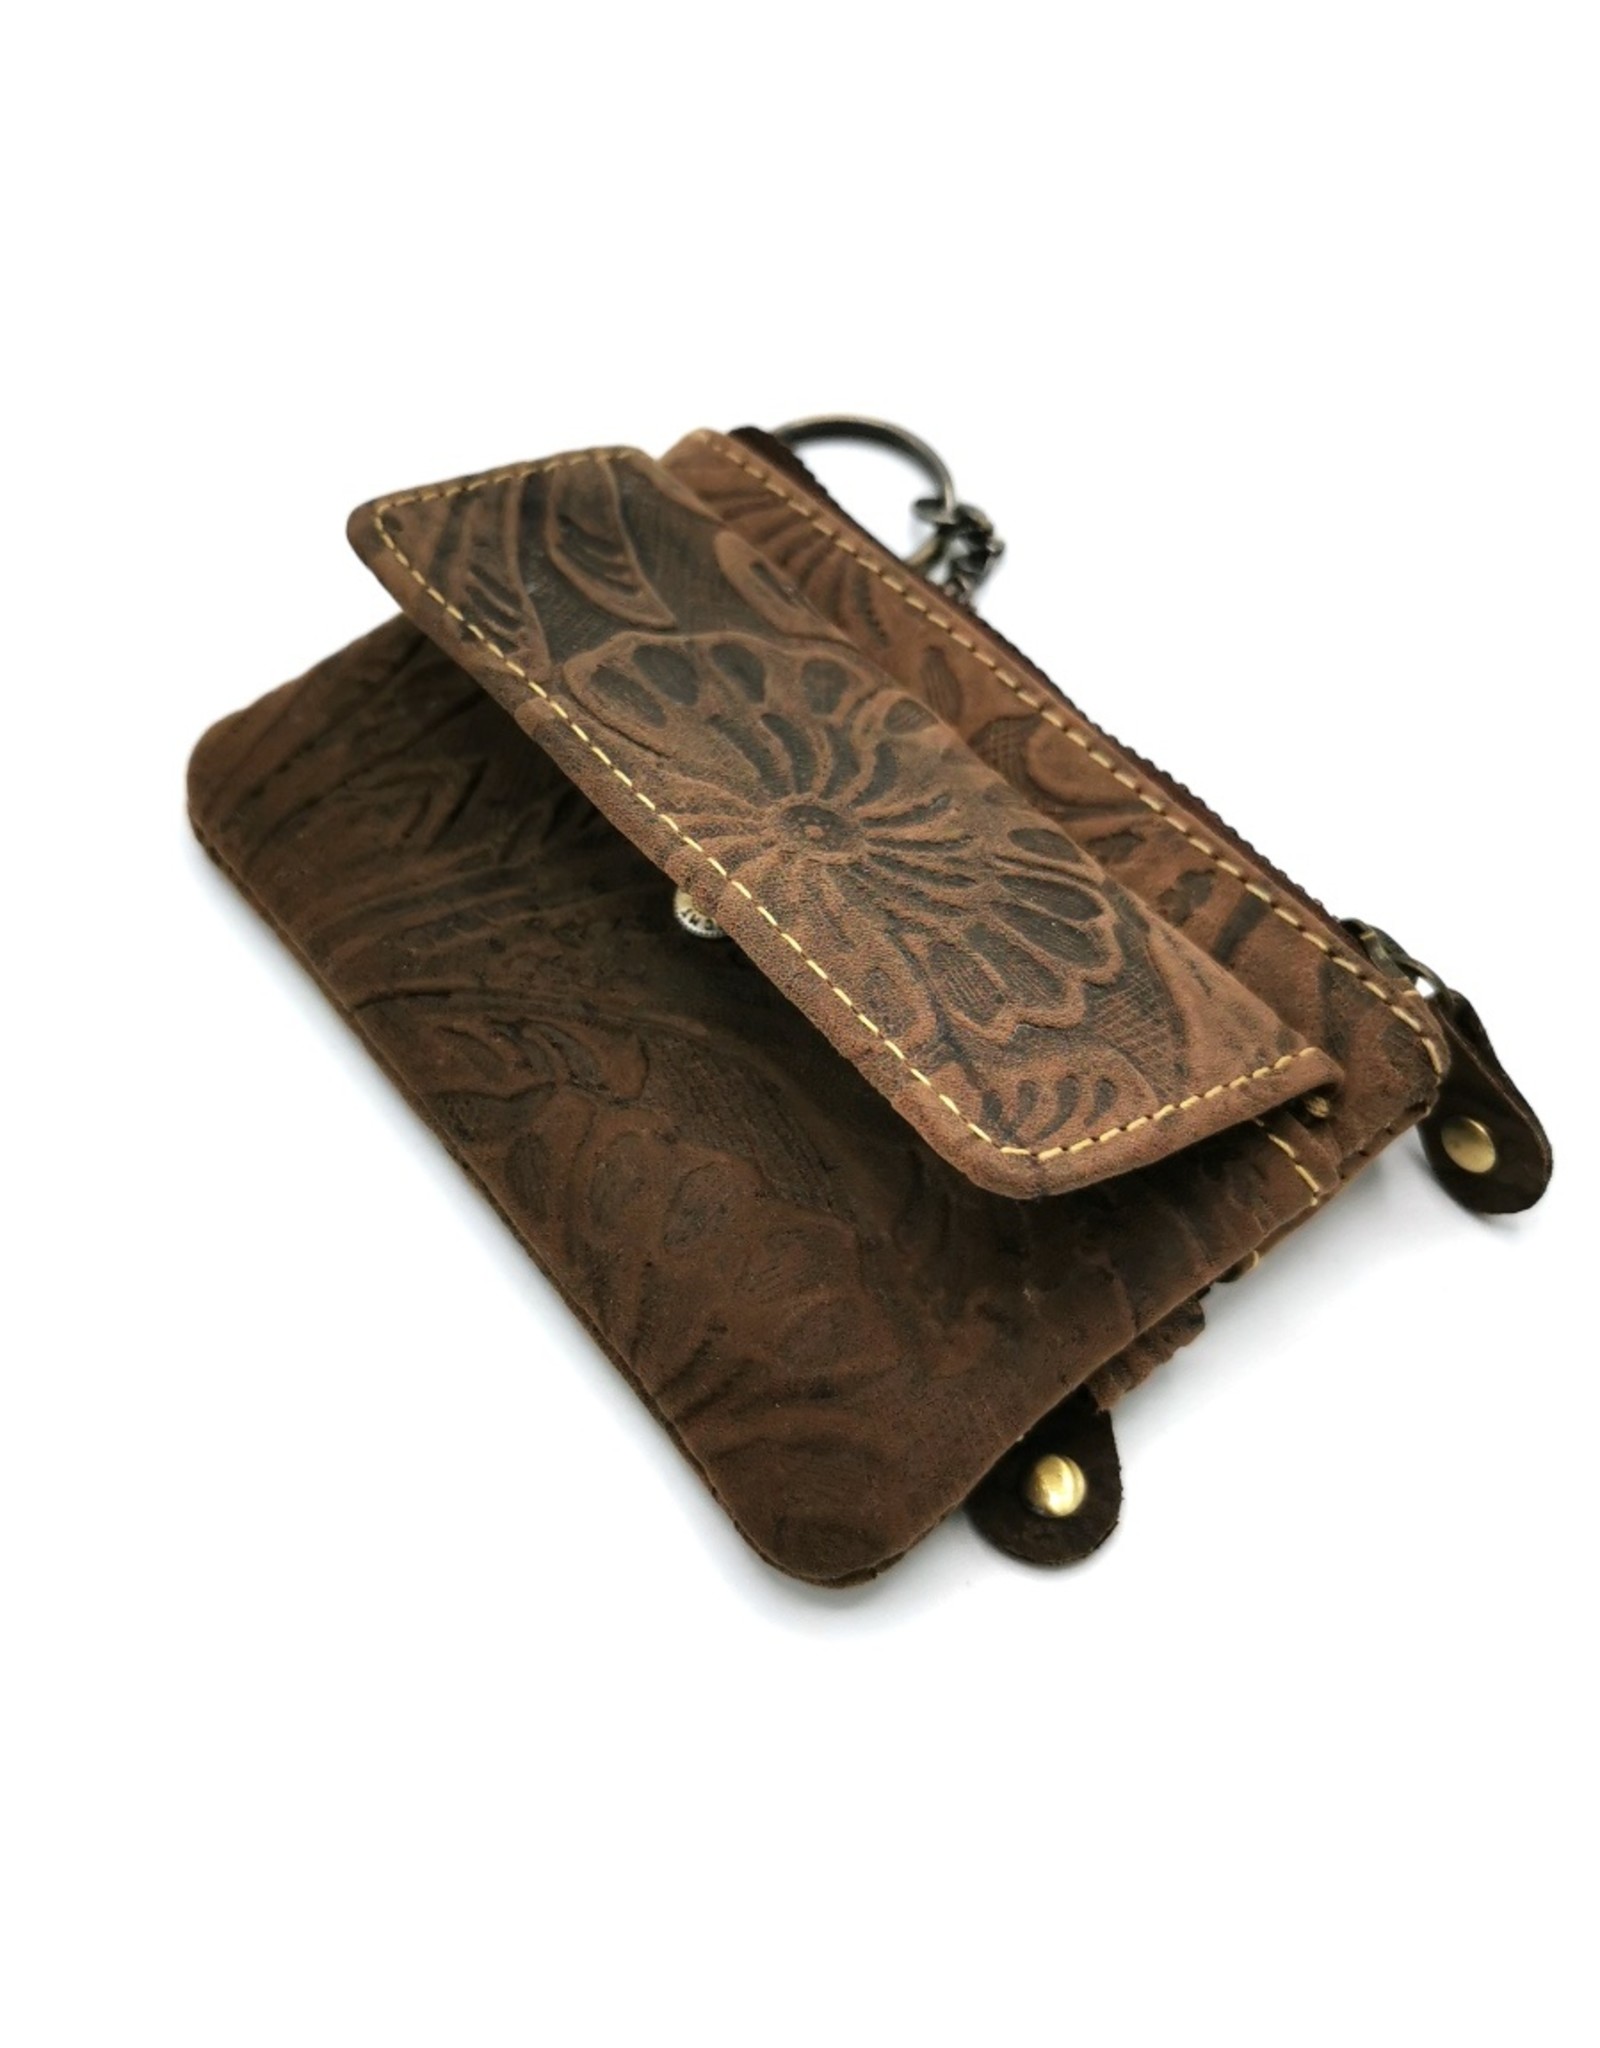 HillBurry Leather Wallets -   Leather key case with embossed flowers (Brown)